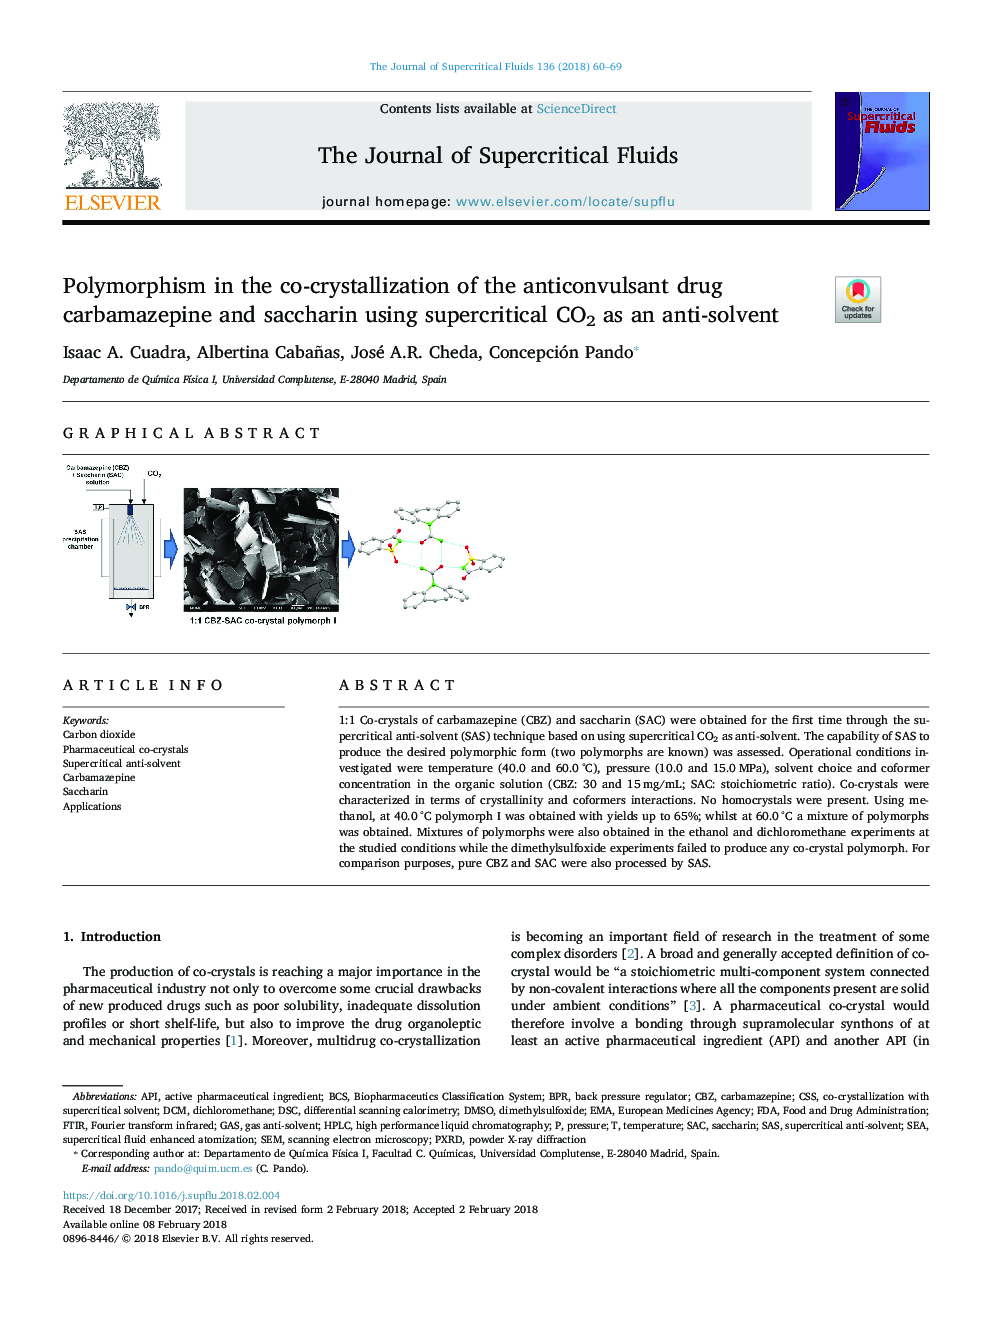 Polymorphism in the co-crystallization of the anticonvulsant drug carbamazepine and saccharin using supercritical CO2 as an anti-solvent